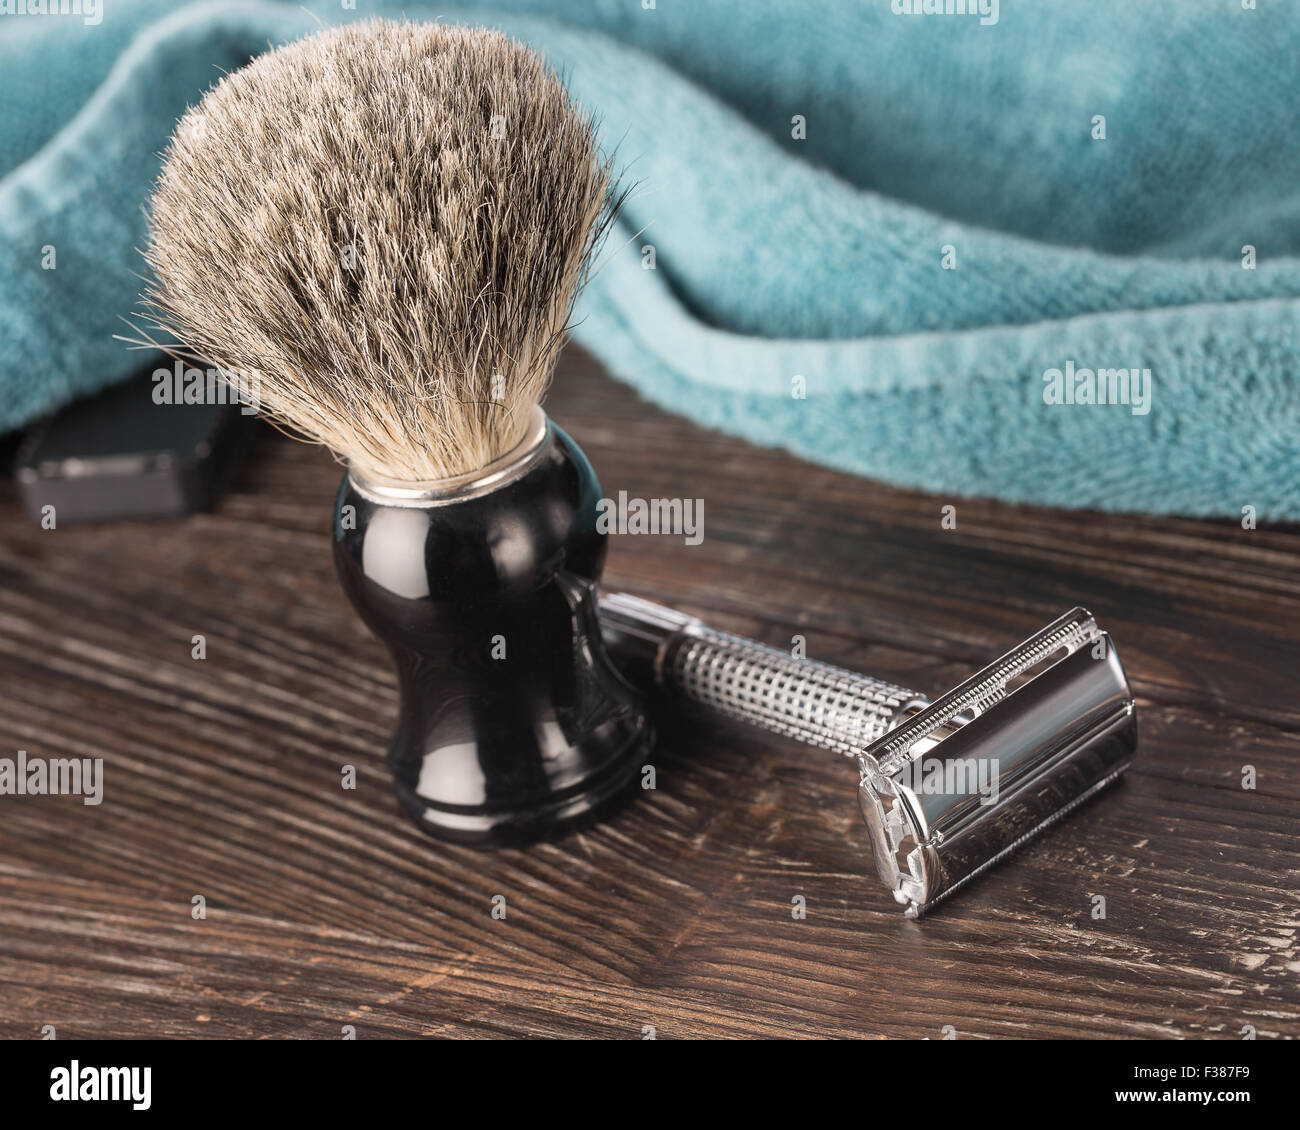 Double edged razor in bathroom setting prepared for a wet shave Stock Photo